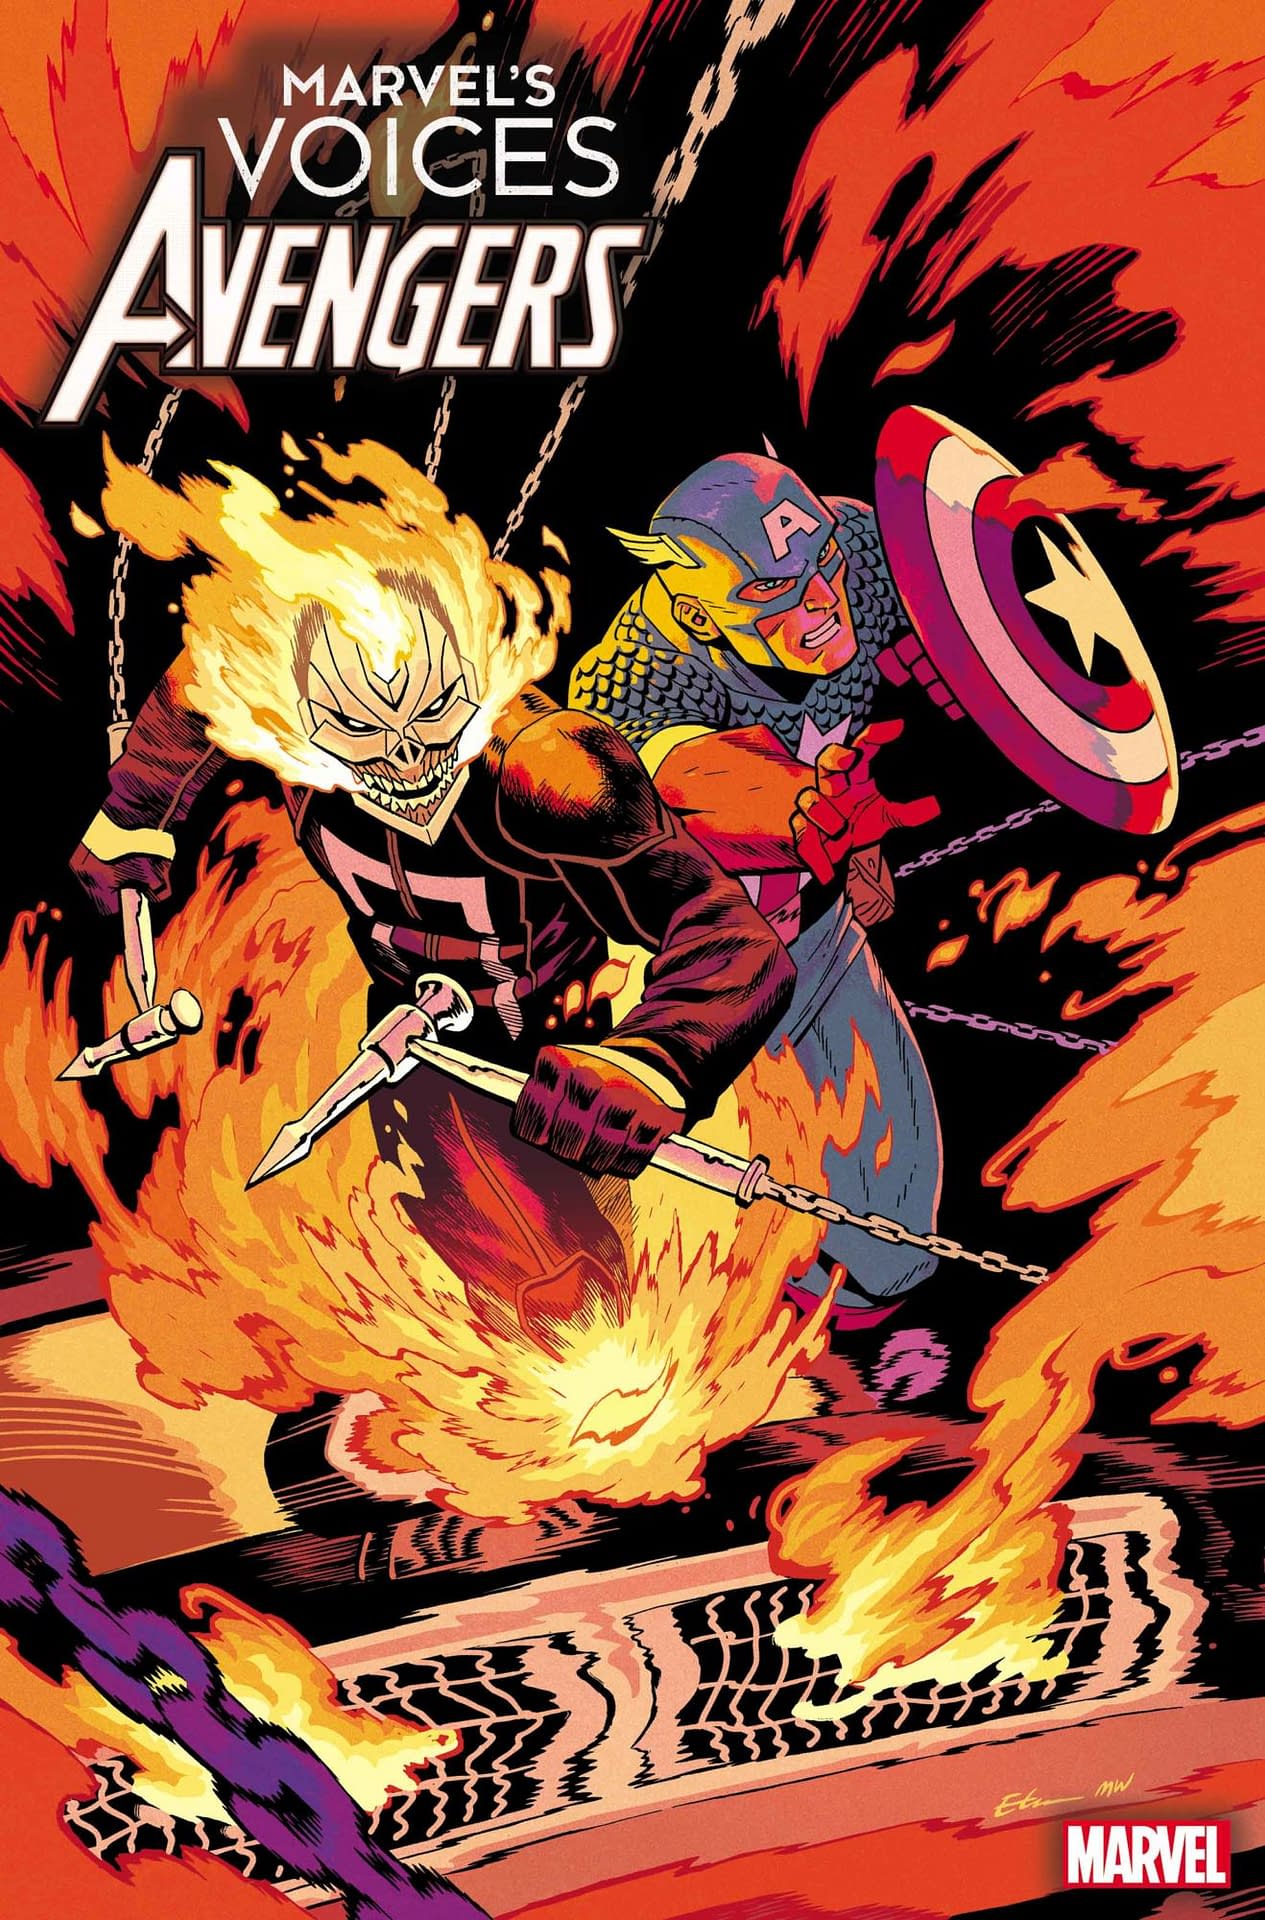 AVENGERS ASSEMBLE crossover continues in Marvel's December titles